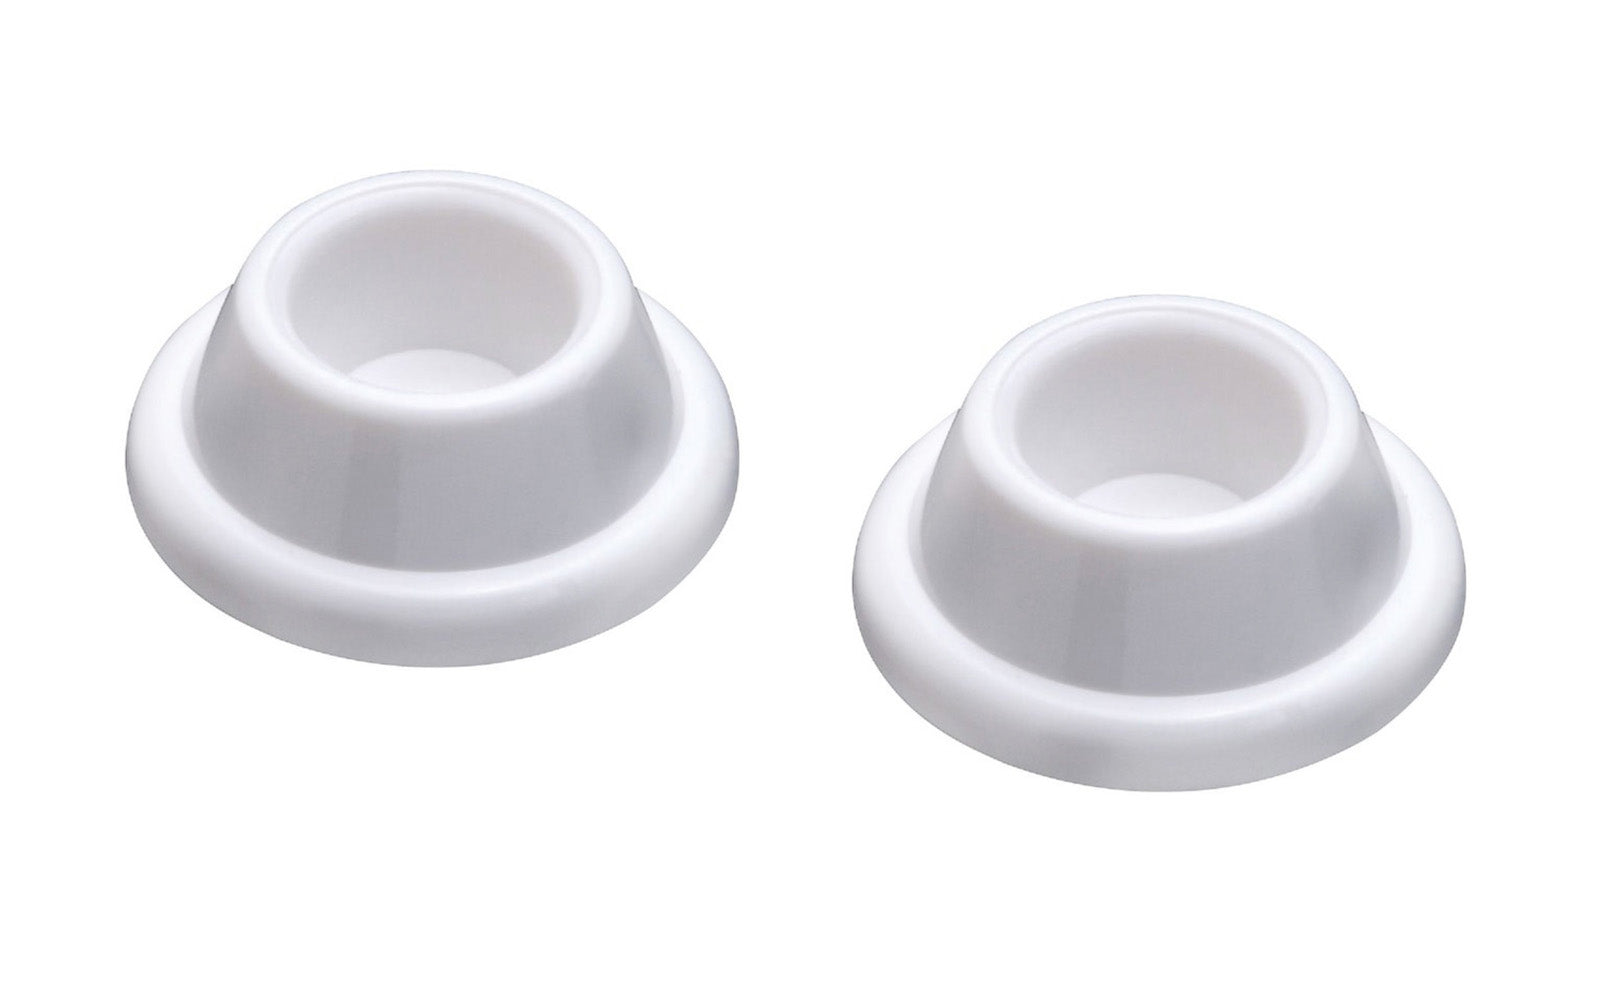 White Door Stops - 2 Pack. Flexible, plastic bumper is designed to protect walls from door knob damage. Specific uses include on refrigerator, closet, & cabinet doors. Covers minor damage and marks on walls. Stick adhesive-backed stop for use on clean and smooth surfaces. National Hardware Model No. N215-897. 